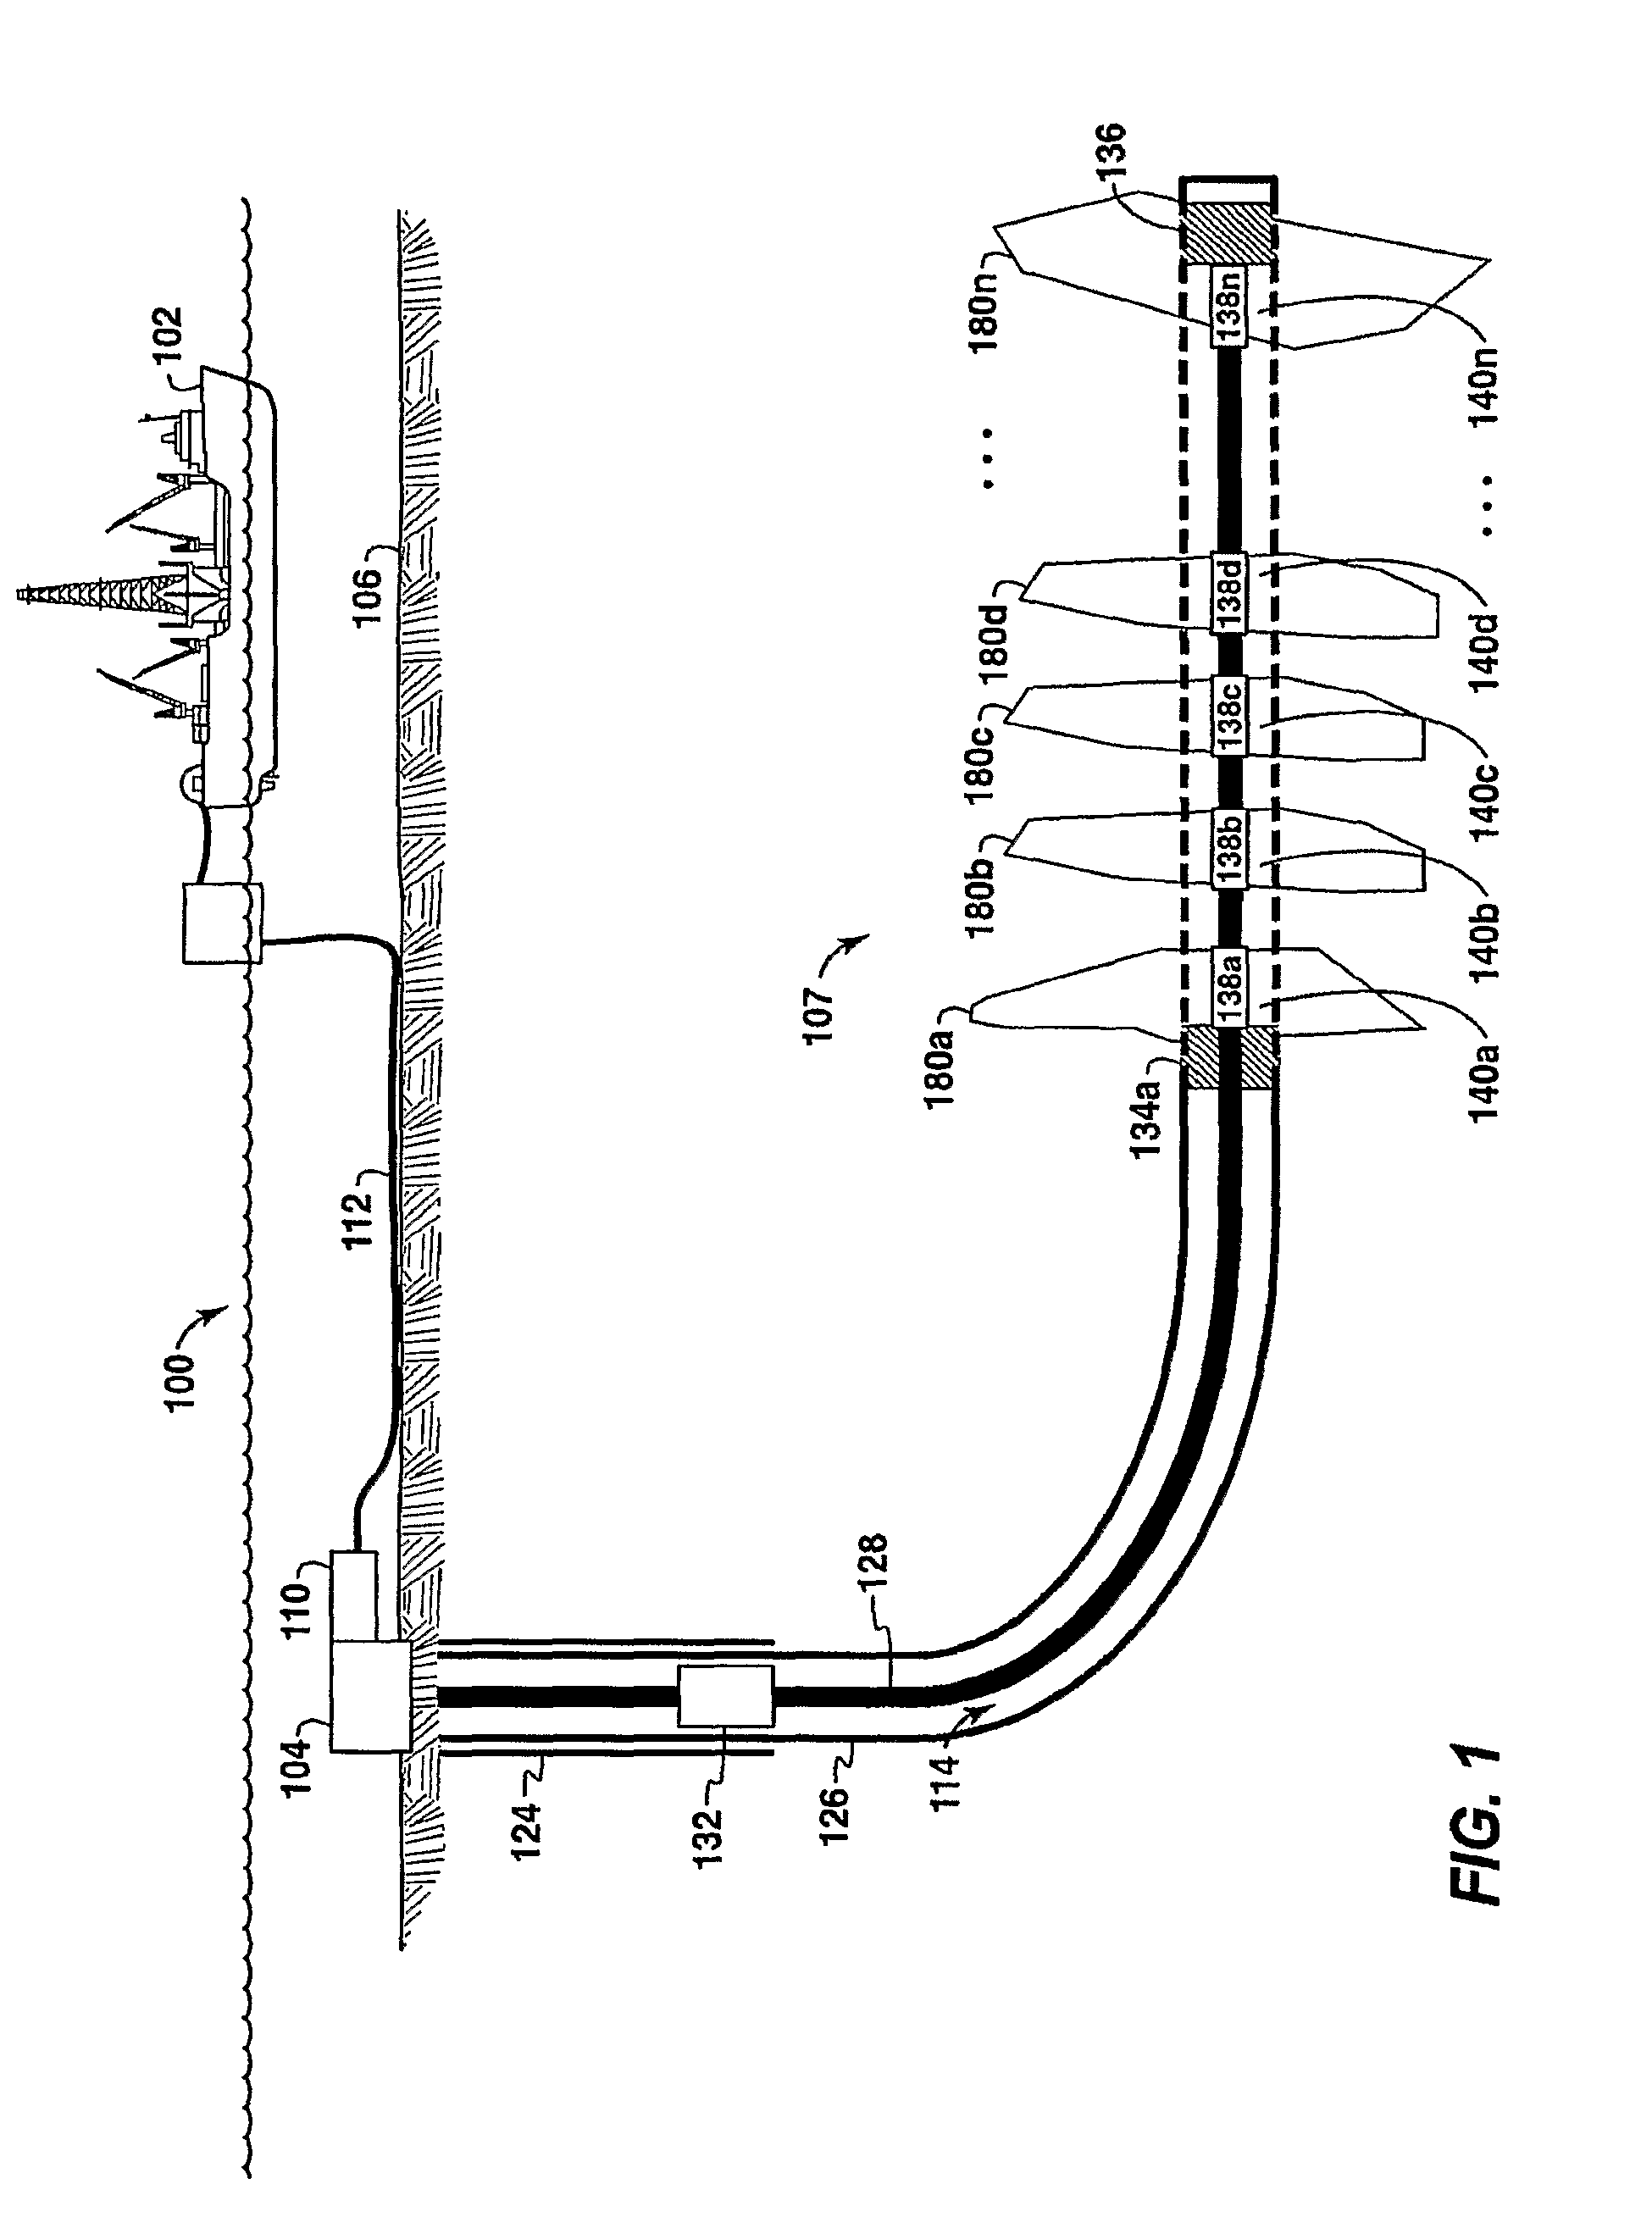 Wellbore method and apparatus for sand and inflow control during well operations